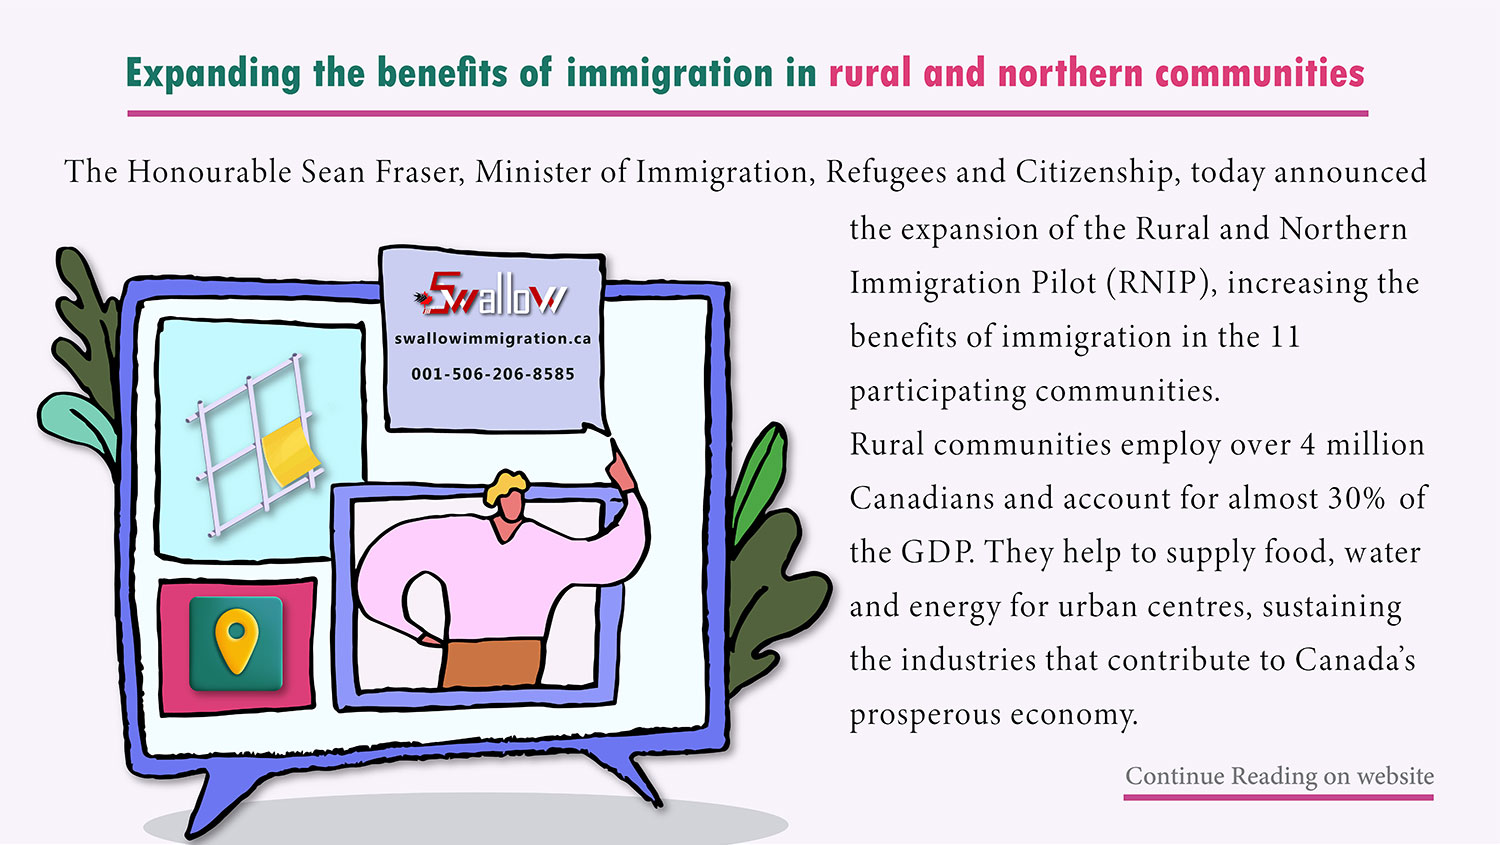 Expanding the benefits of immigration in rural and northern communities